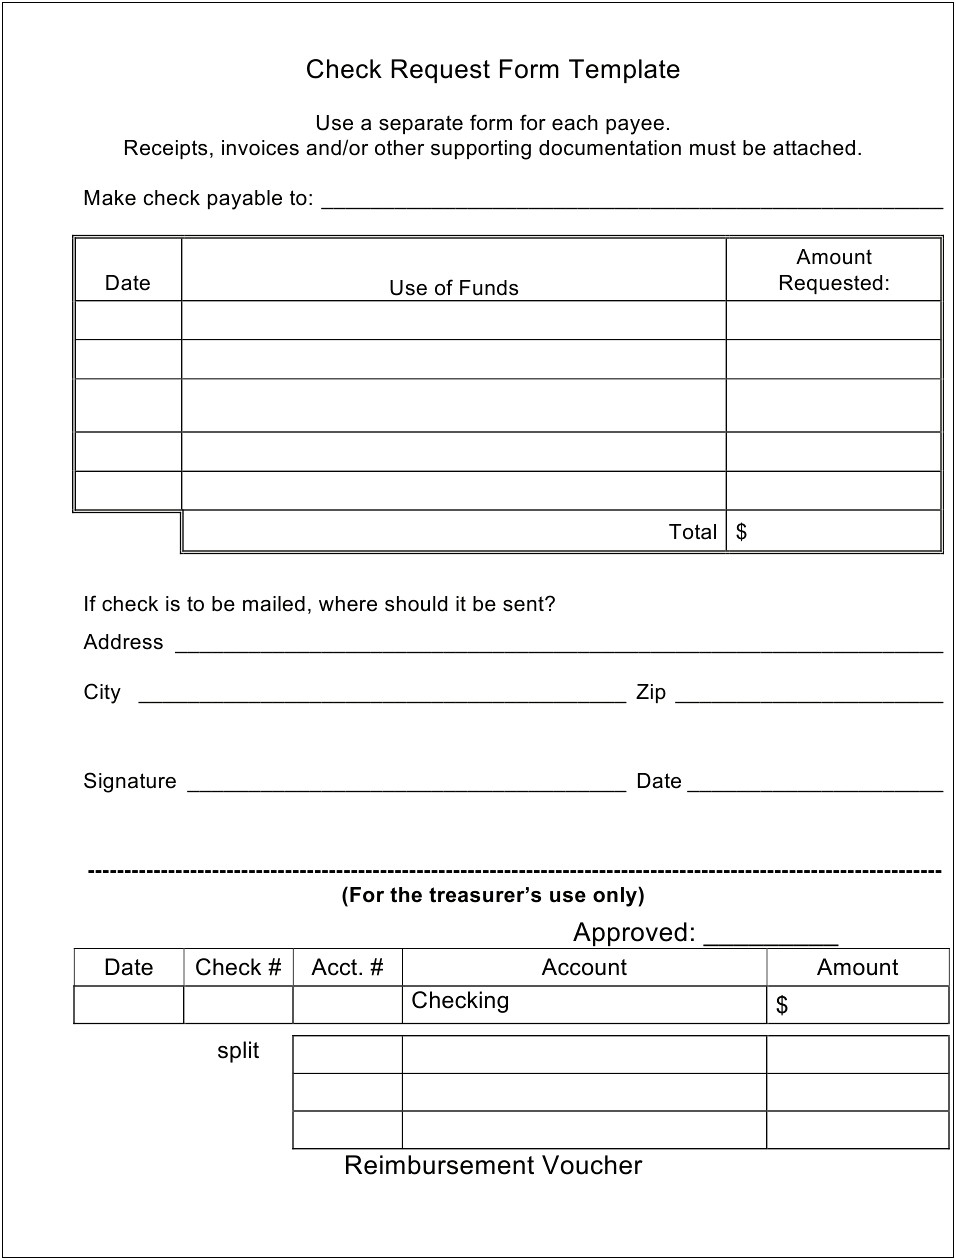 Check Request Form Template Excel Free